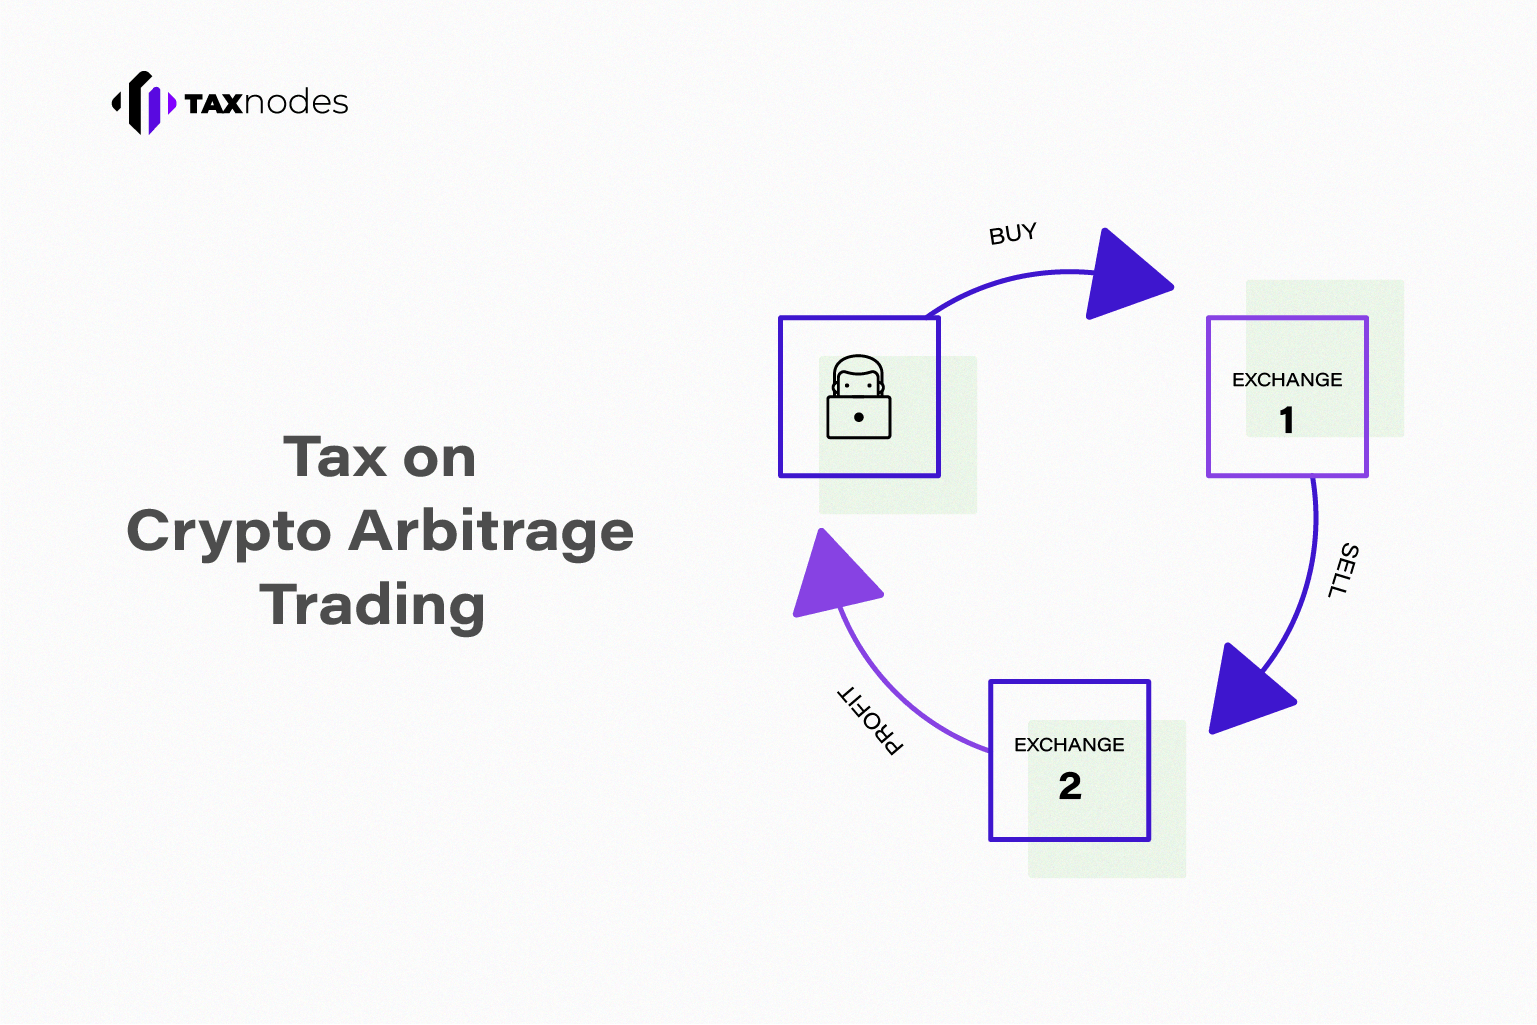 How to Pay Tax on Crypto Arbitrage Trading in India?